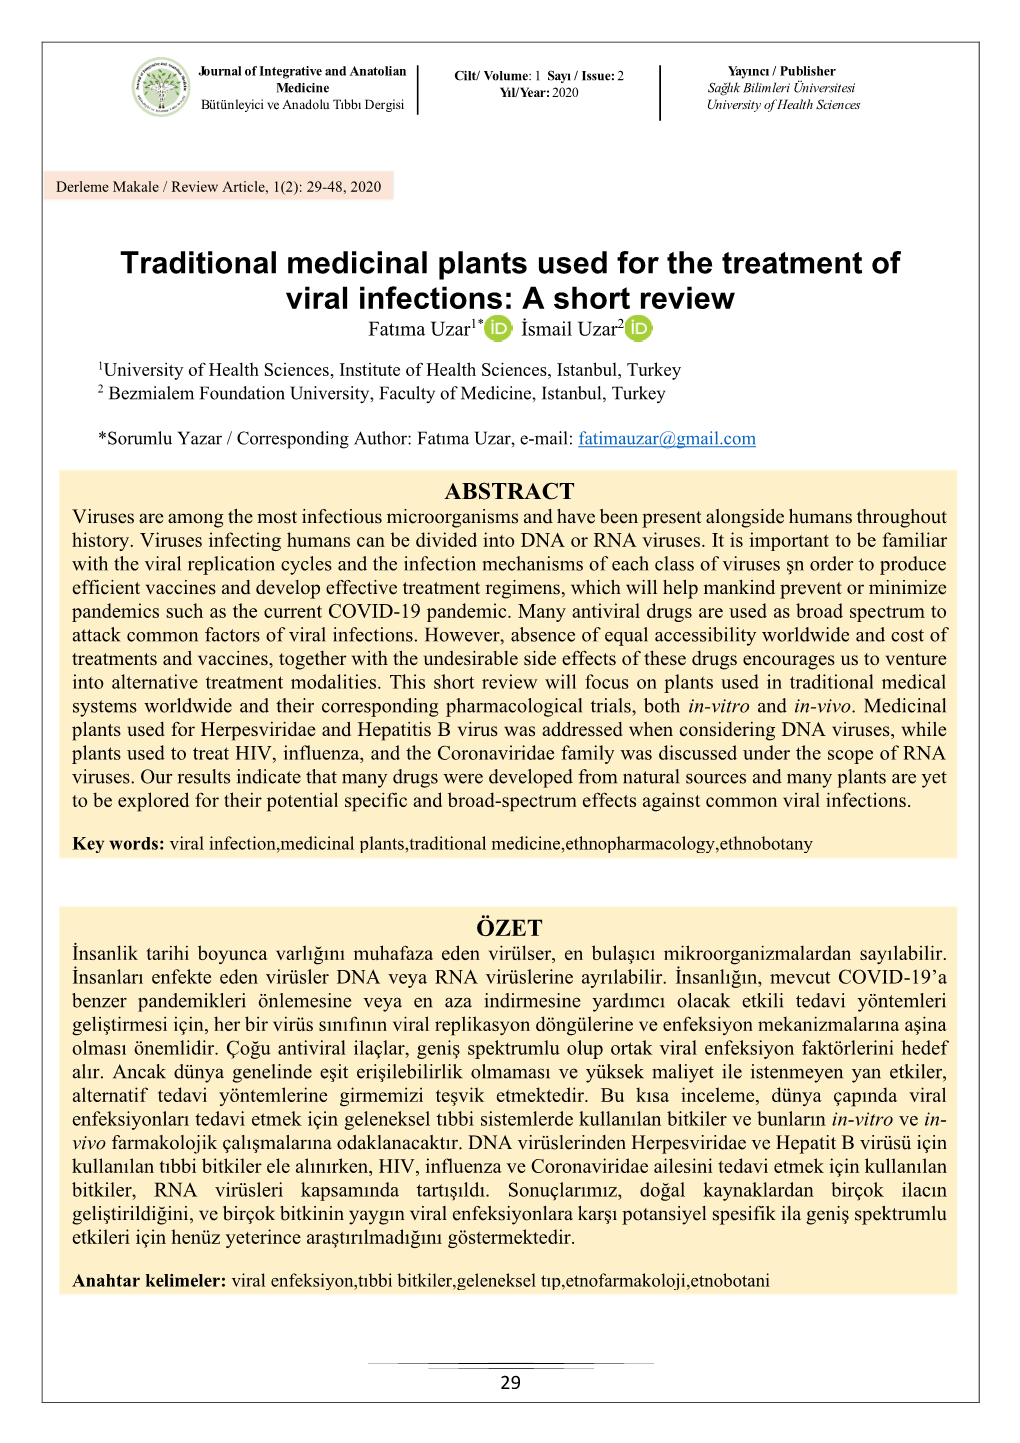 Traditional Medicinal Plants Used for the Treatment of Viral Infections: a Short Review Fatıma Uzar1* İsmail Uzar2